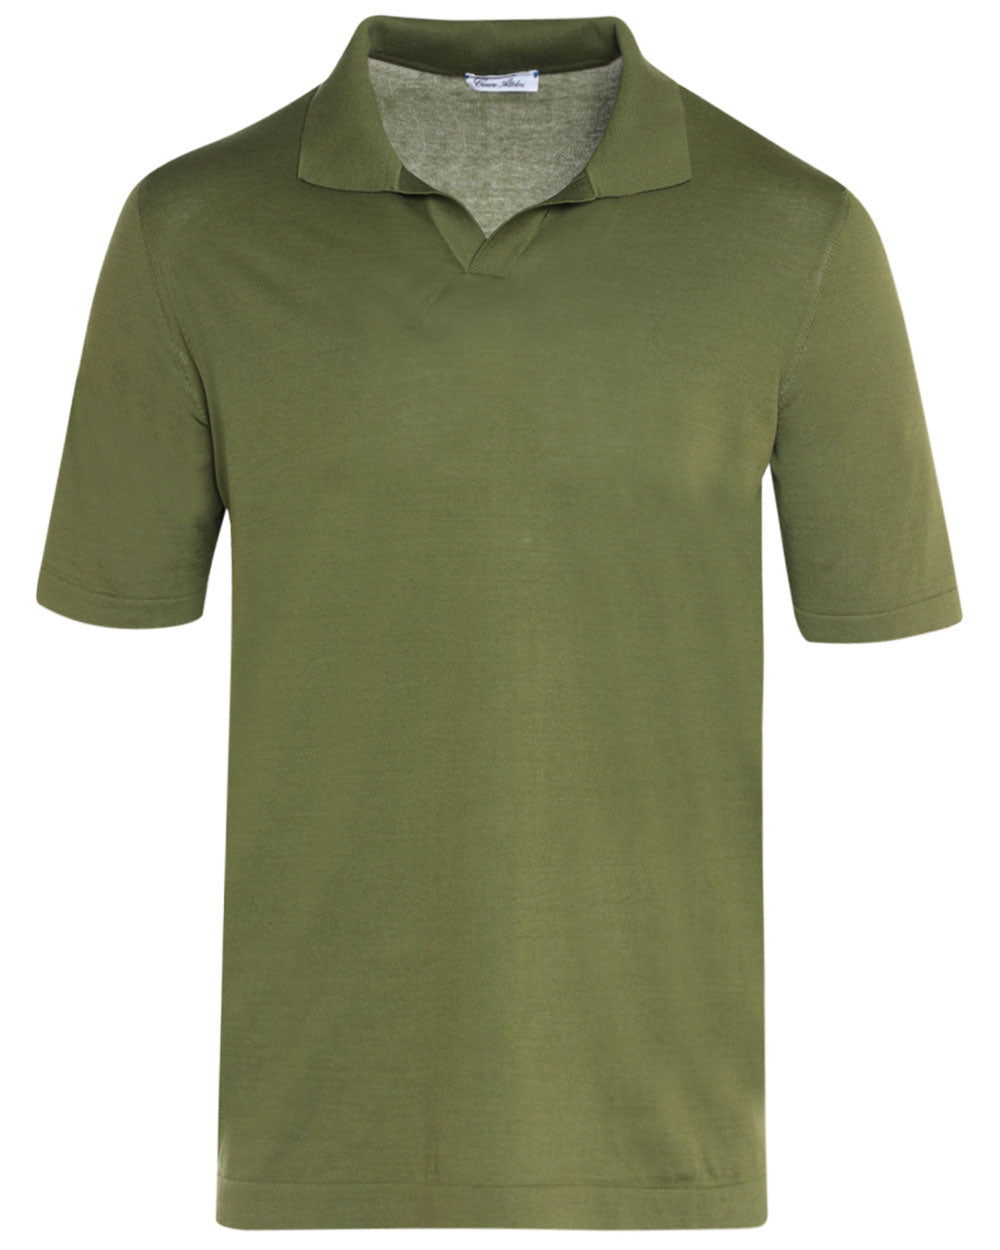 Olive Green Cotton Short Sleeve Johnny Collar Polo